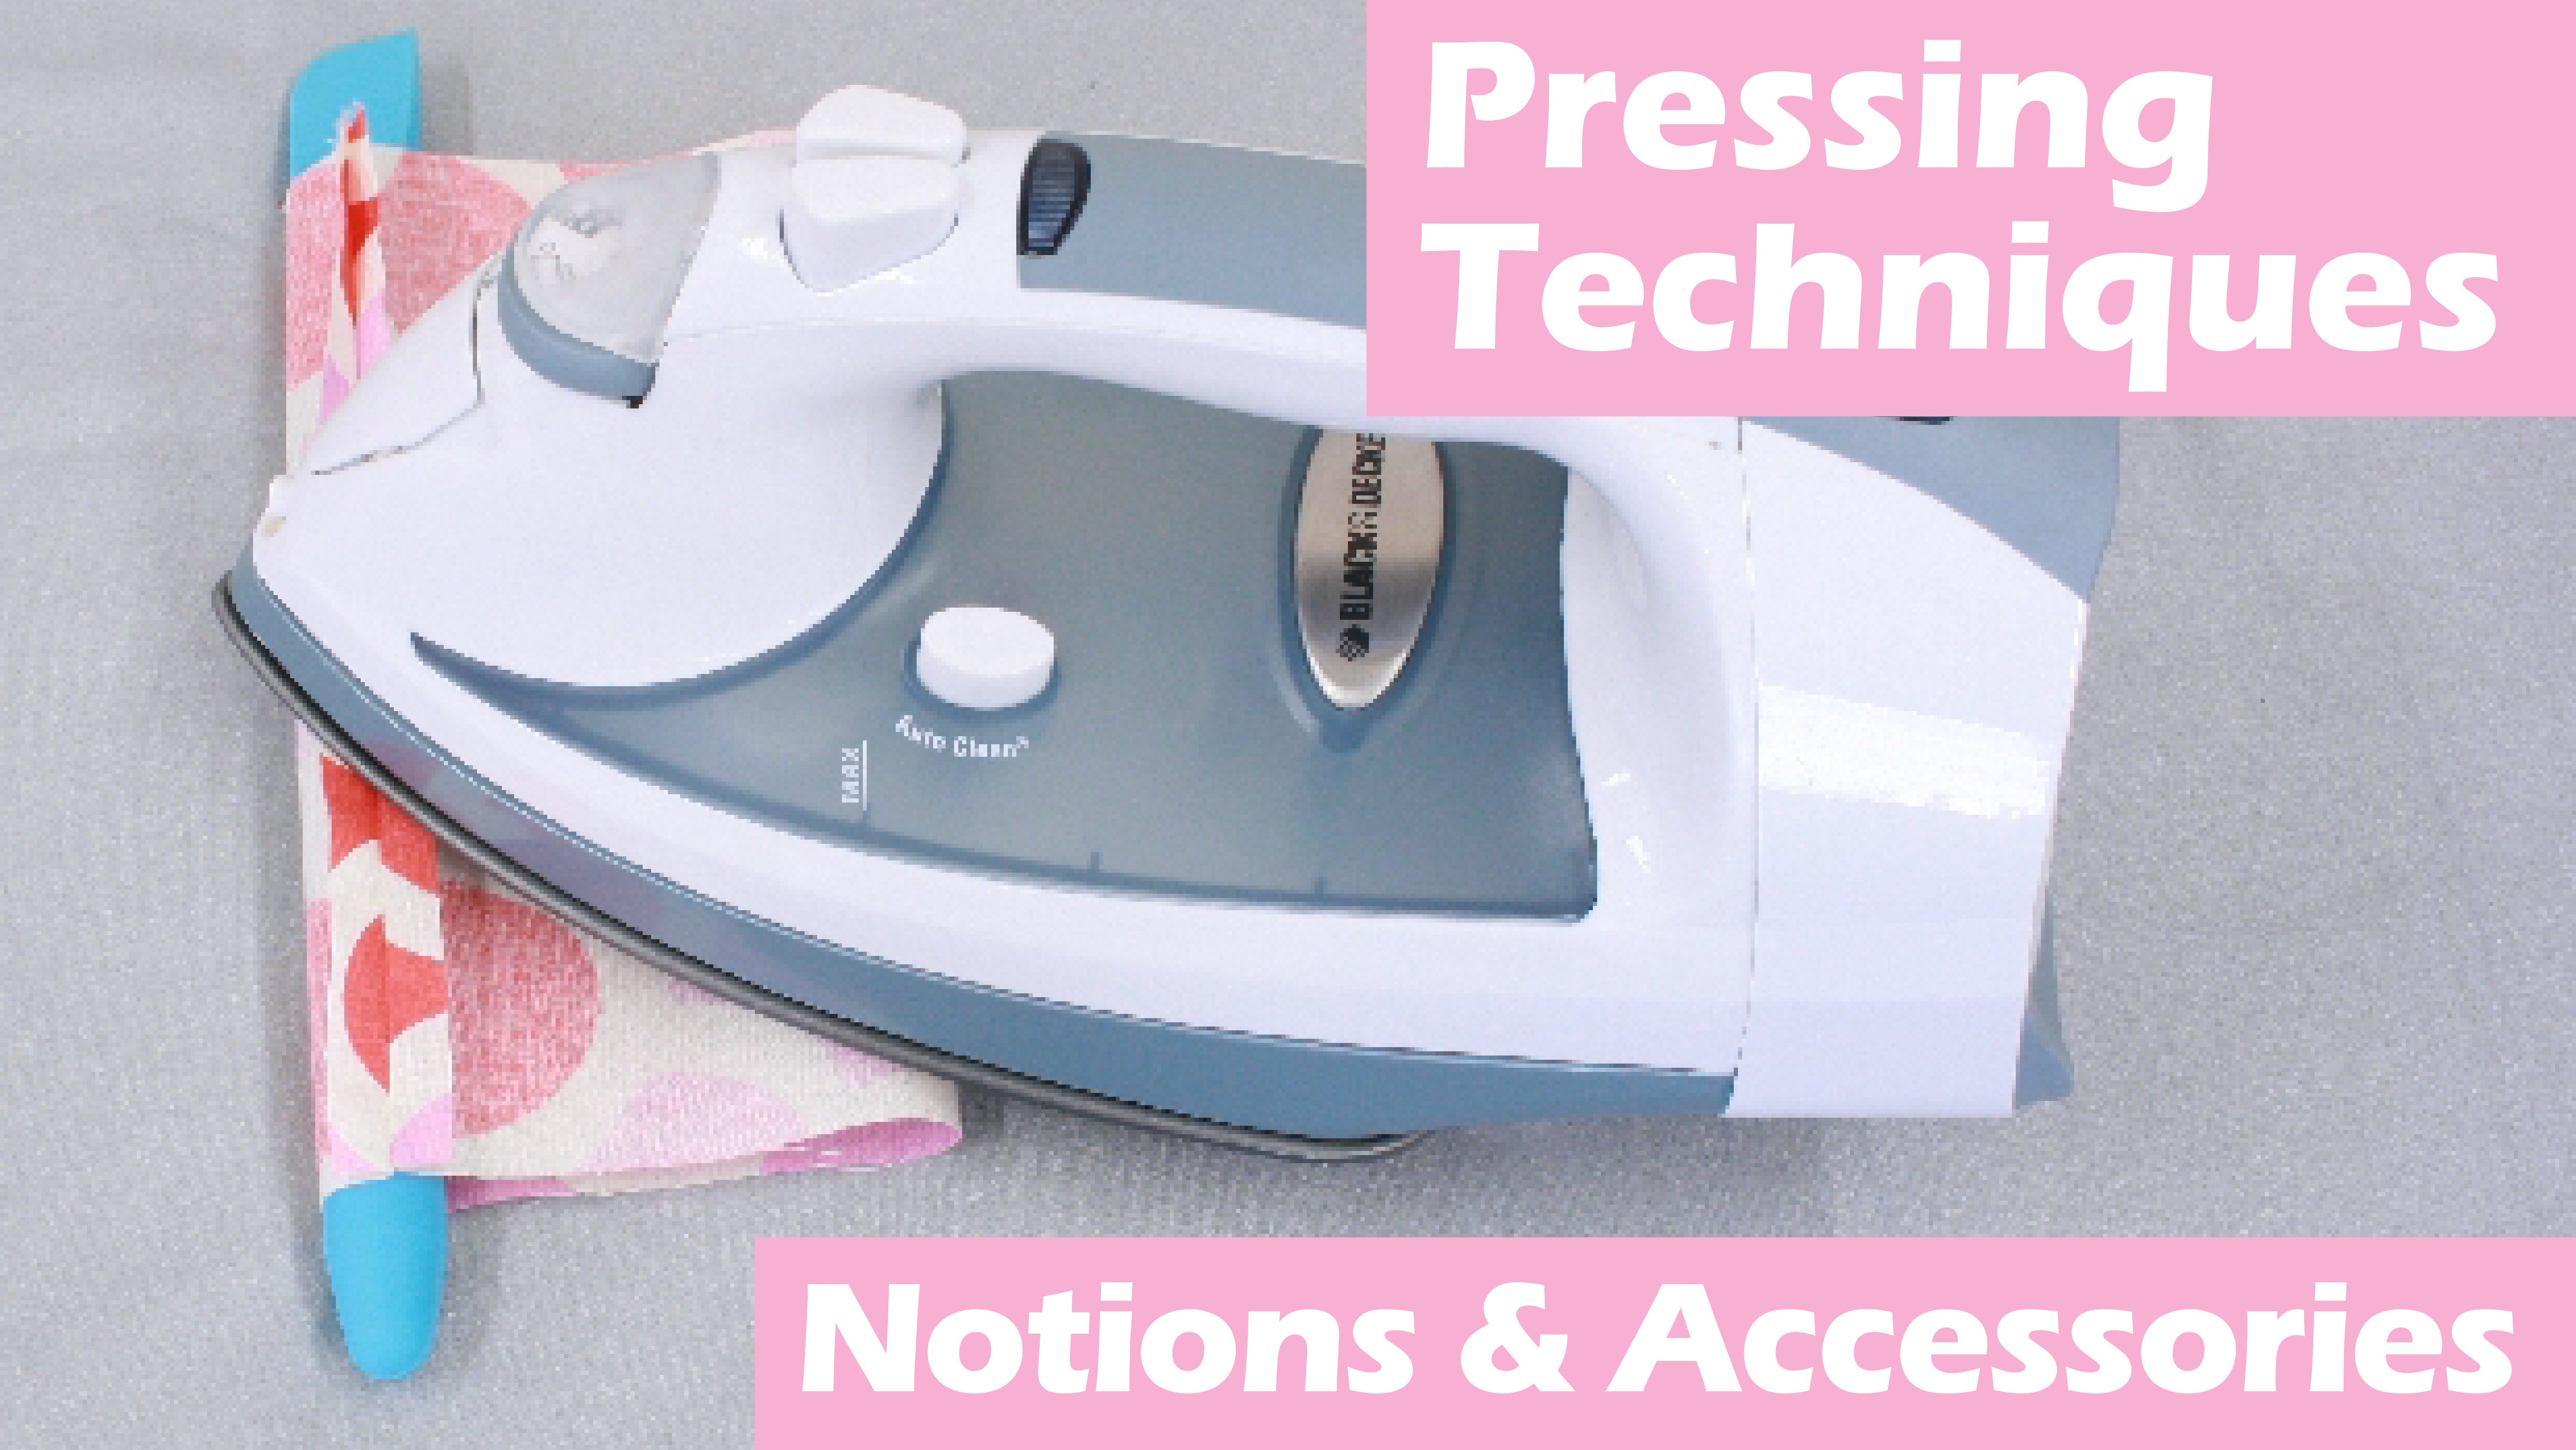 How To Press For Success In Your Sewing And Dressmaking